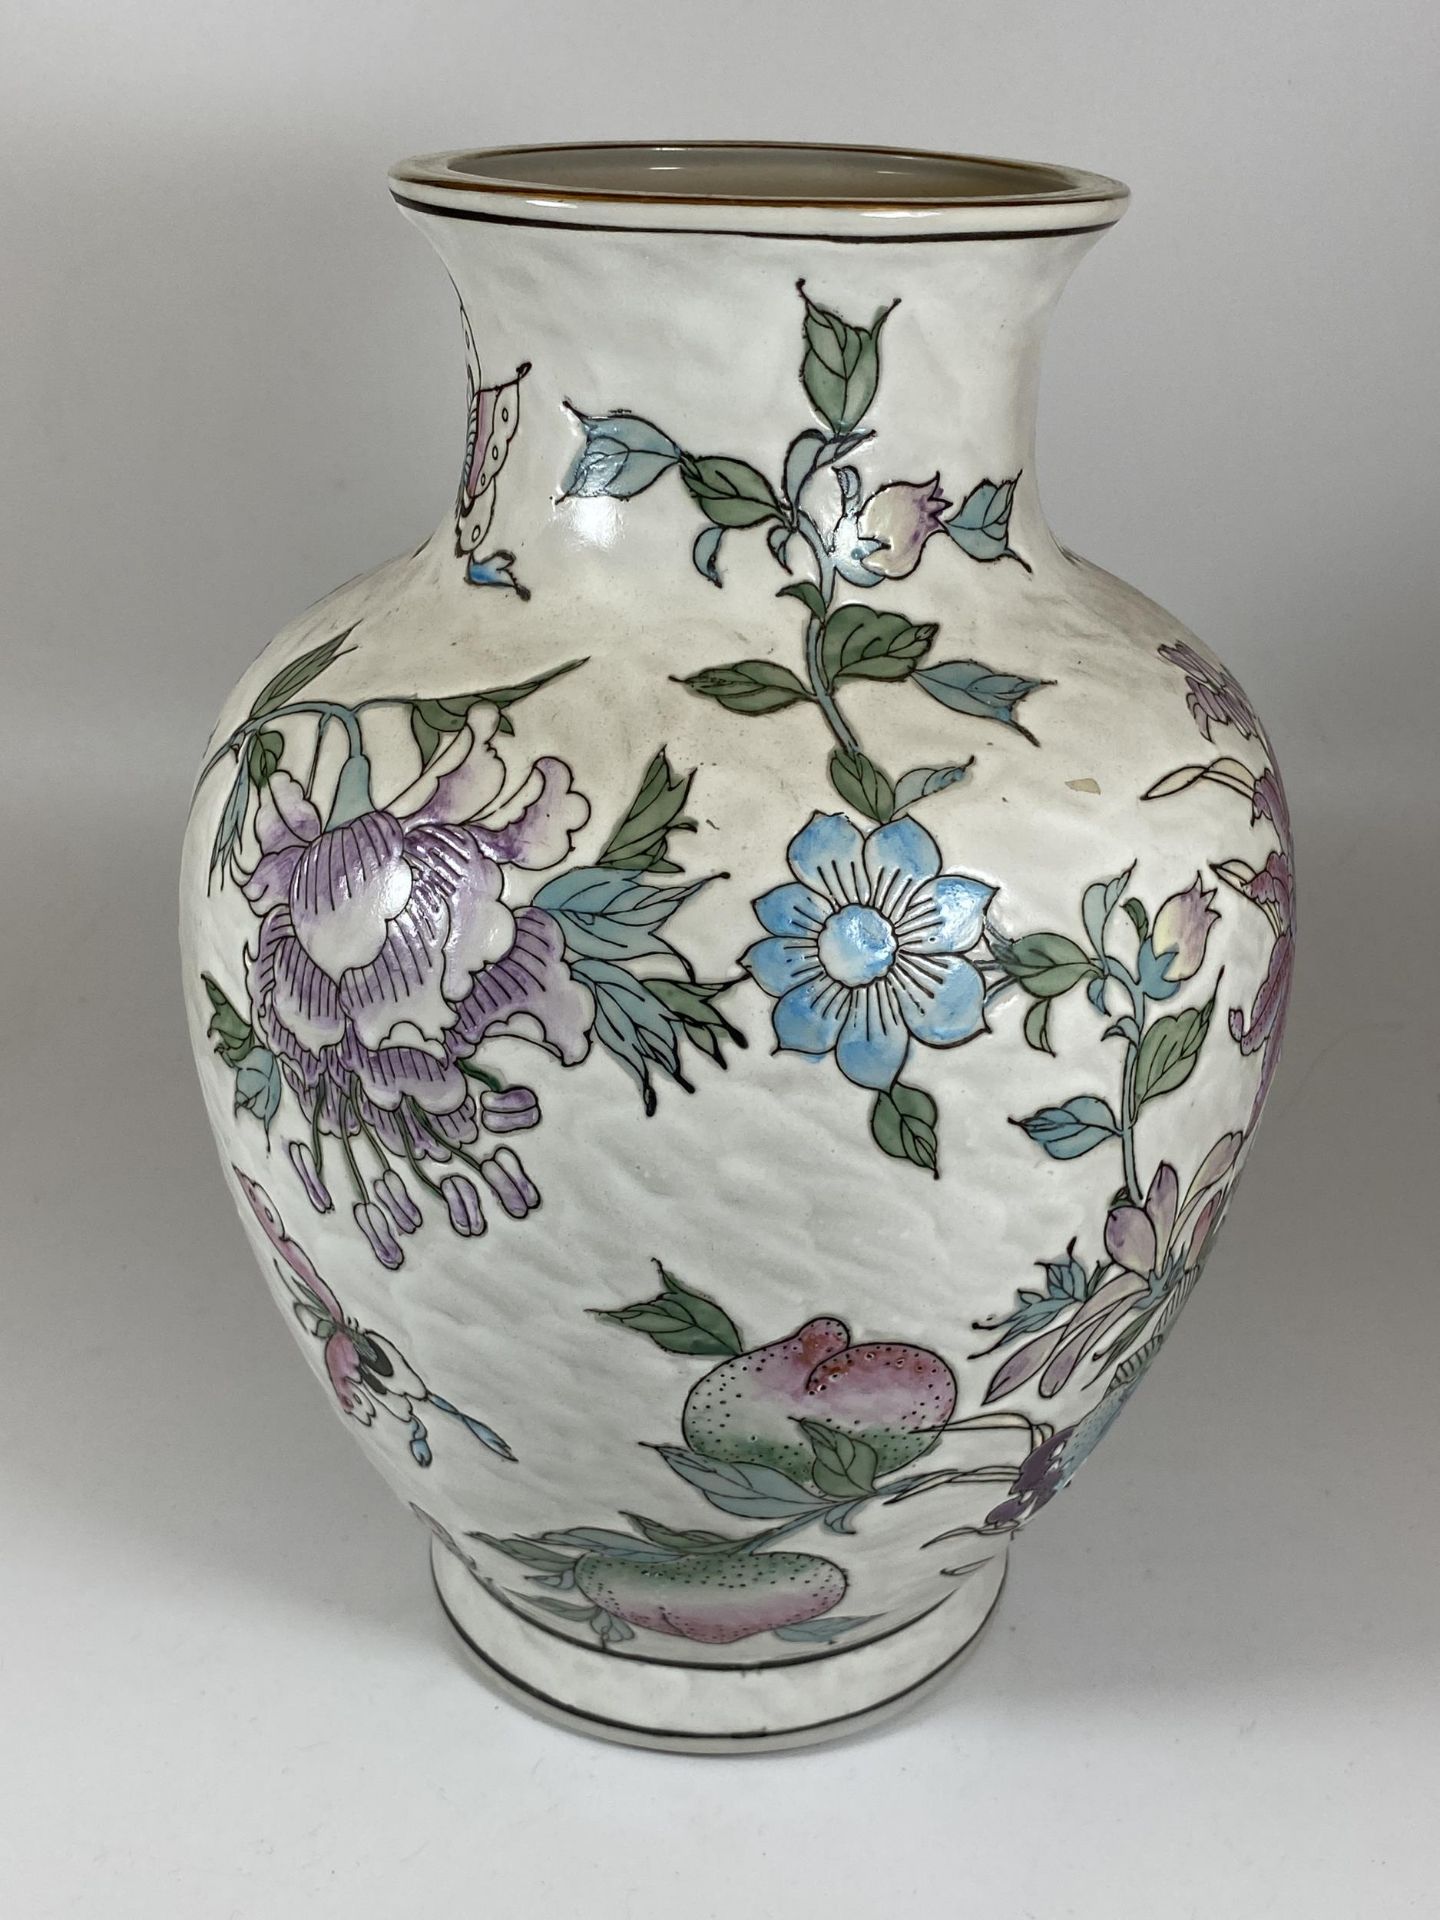 A LARGE 20TH CENTURY CHINESE FLORAL DESIGN VASE, BASE HAS BEEN CONVERTED FOR A LAMP, HEIGHT 31CM - Image 2 of 4